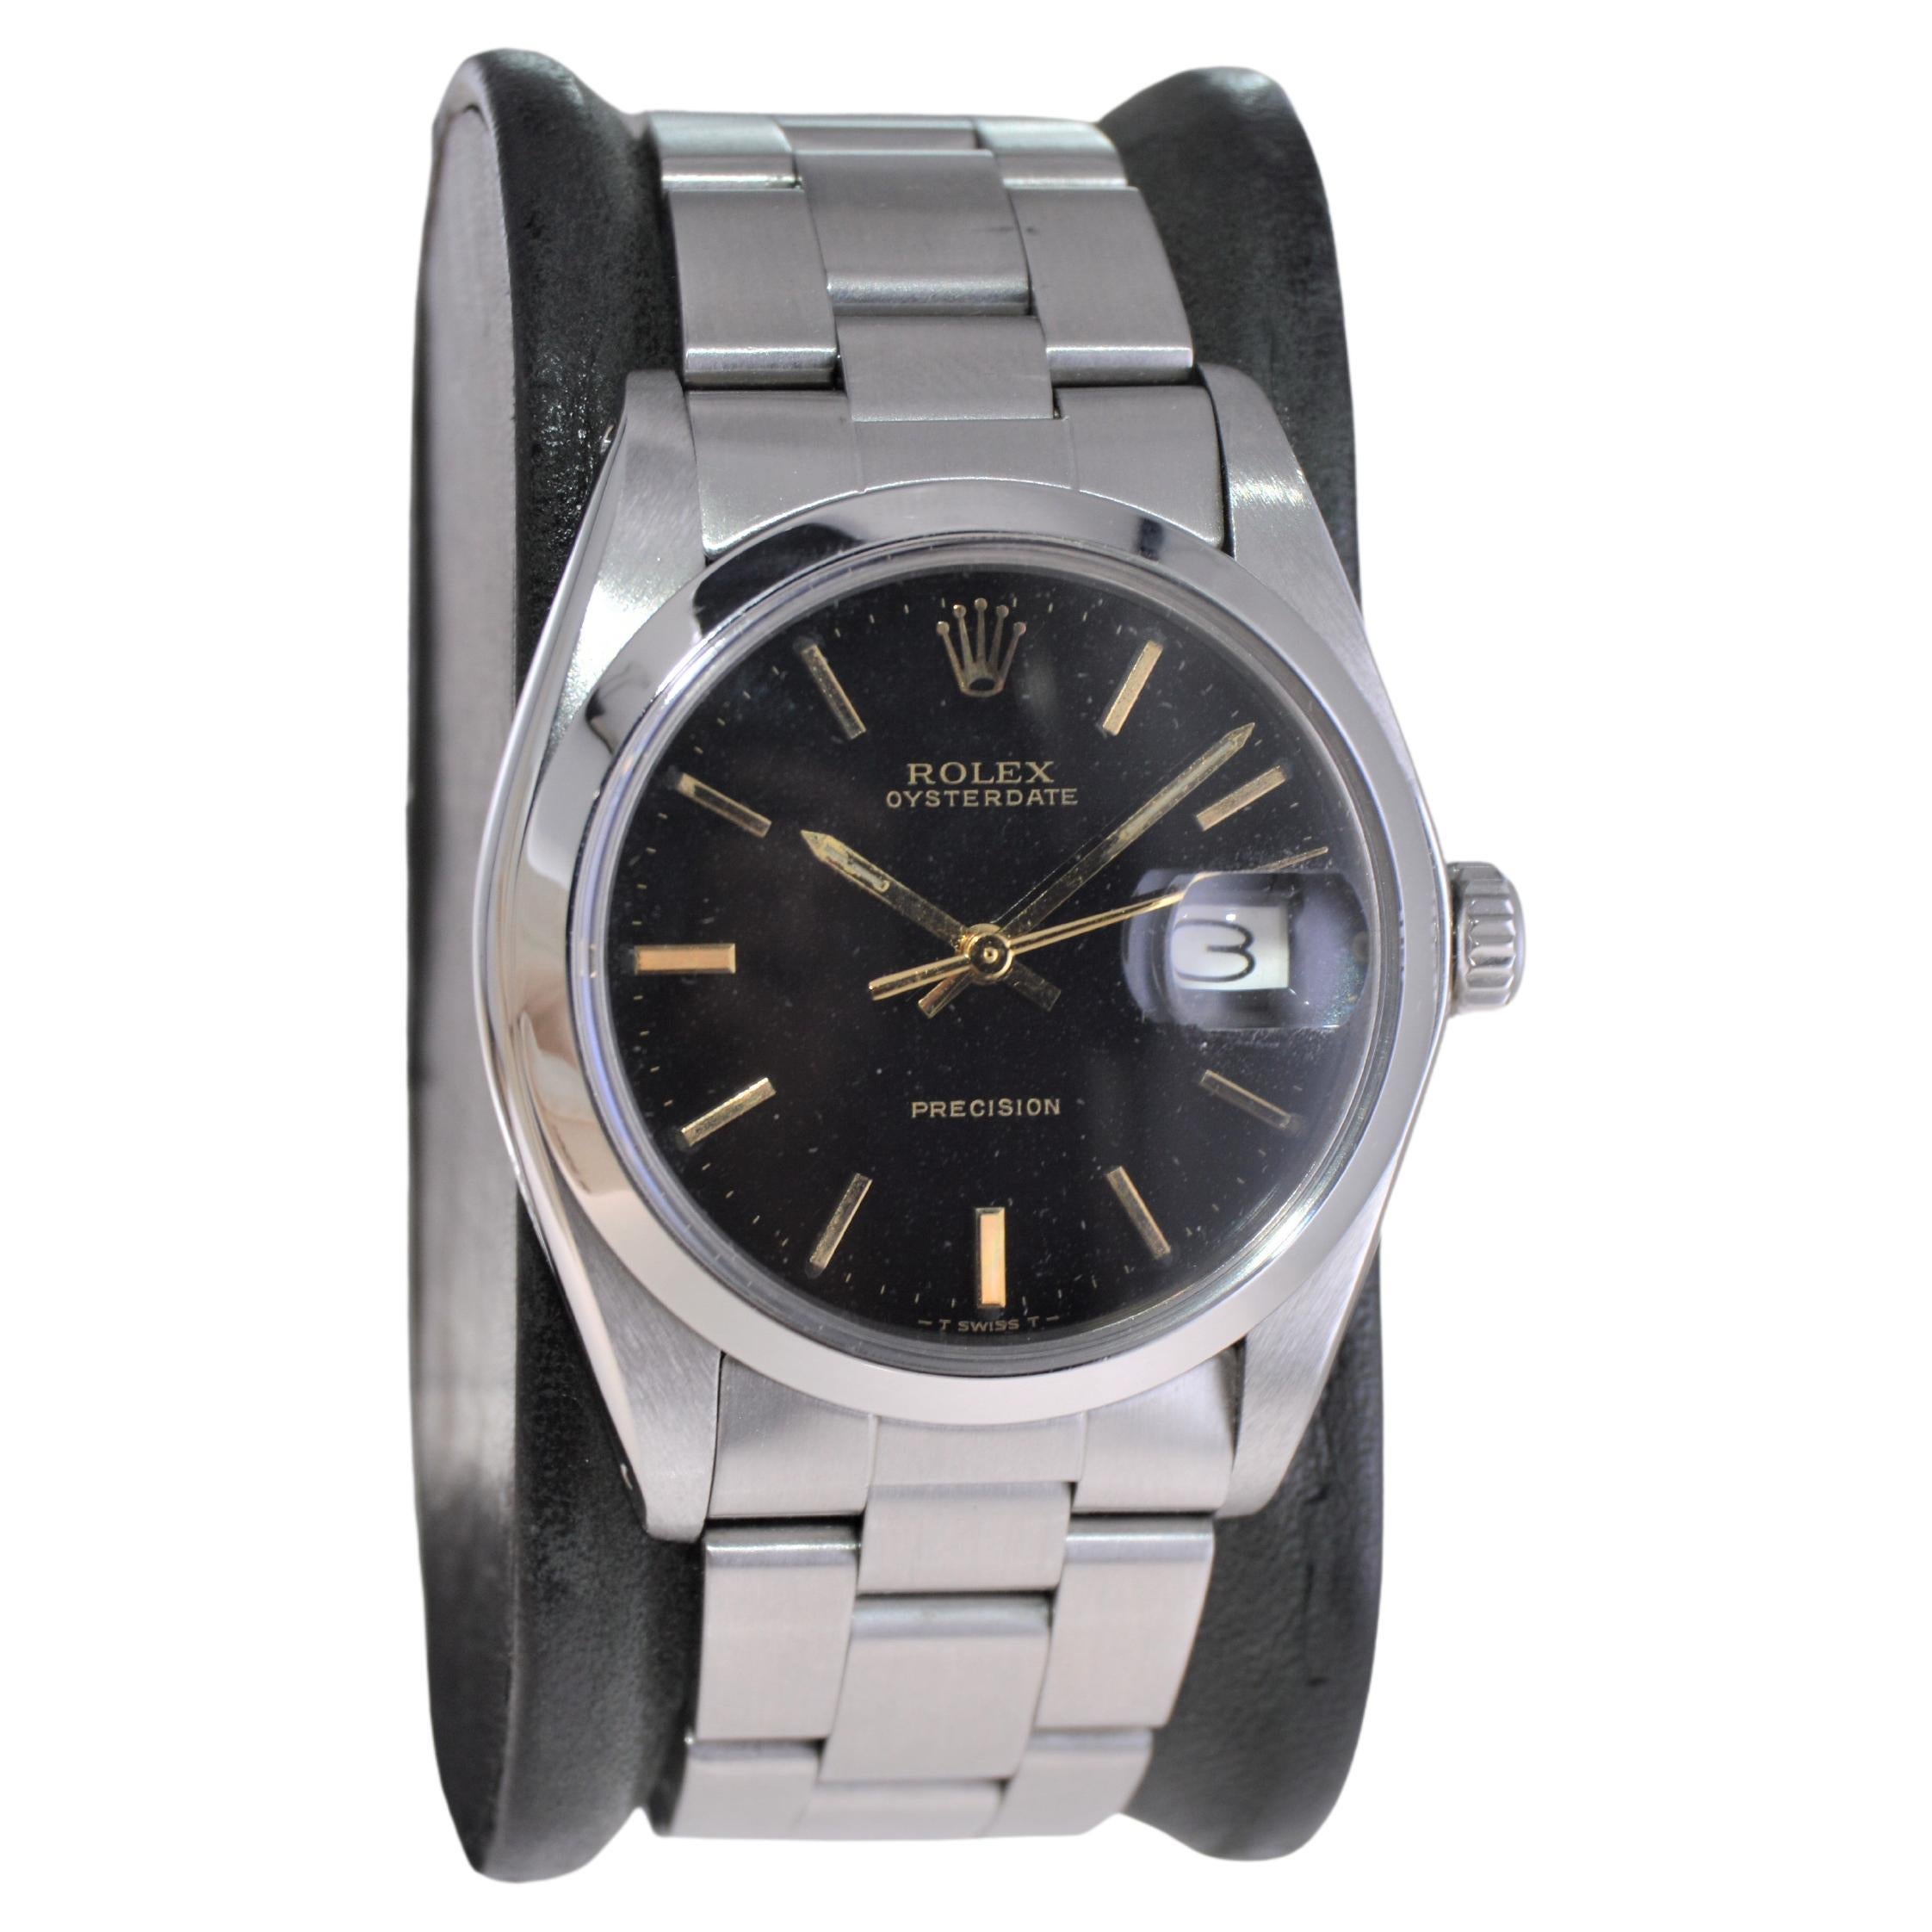 FACTORY / HOUSE: Rolex Watch Company
STYLE / REFERENCE: Oysterdate / Reference 1200
METAL / MATERIAL: Stainless Steel
CIRCA / YEAR: 1979
DIMENSIONS / SIZE: Length 41mm X Diameter 35mm
MOVEMENT / CALIBER: Manual Winding / 17 Jewels / Caliber